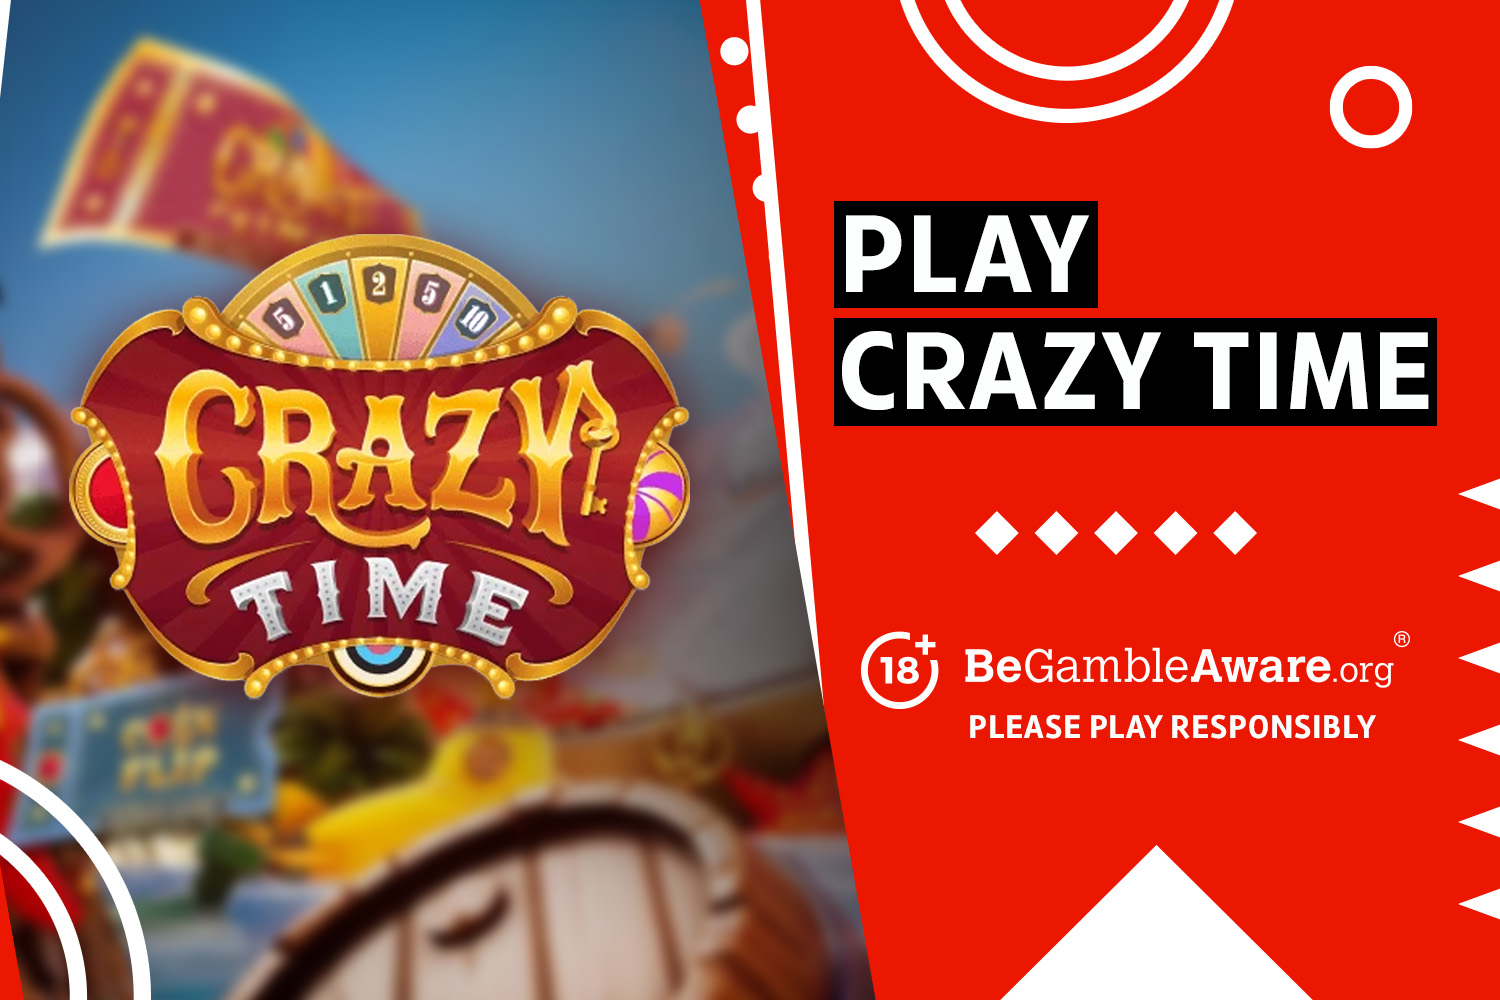 Play Crazy Time. 18+ BeGambleAware.org Please play responsibly.